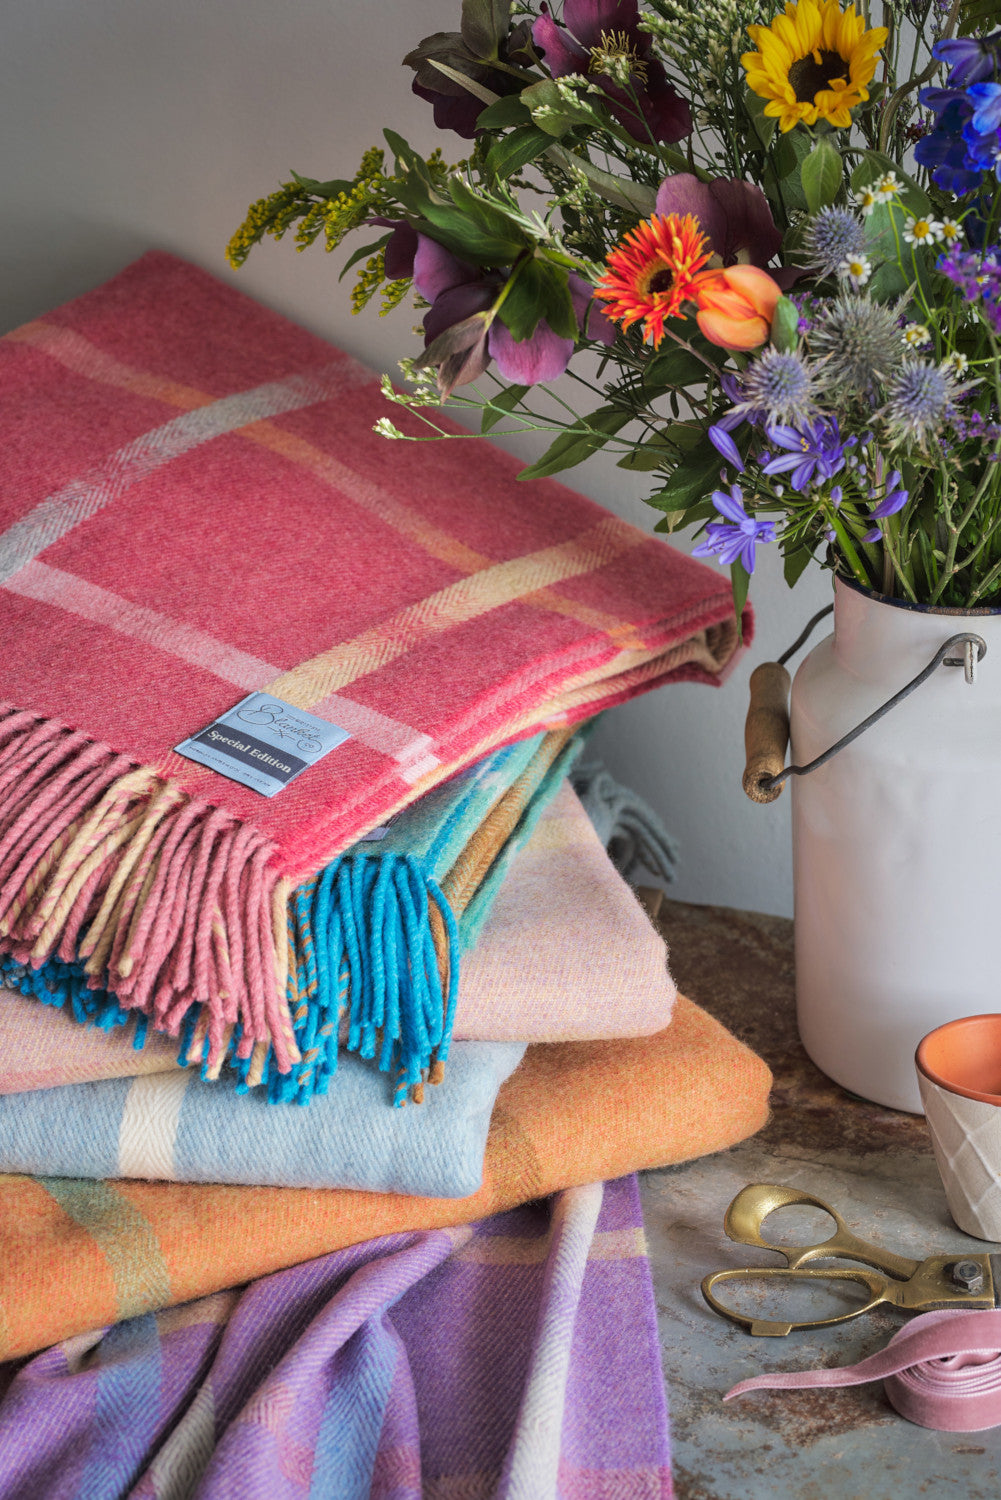 A stack of folded merino lambswool blankets beside a pot of flowers